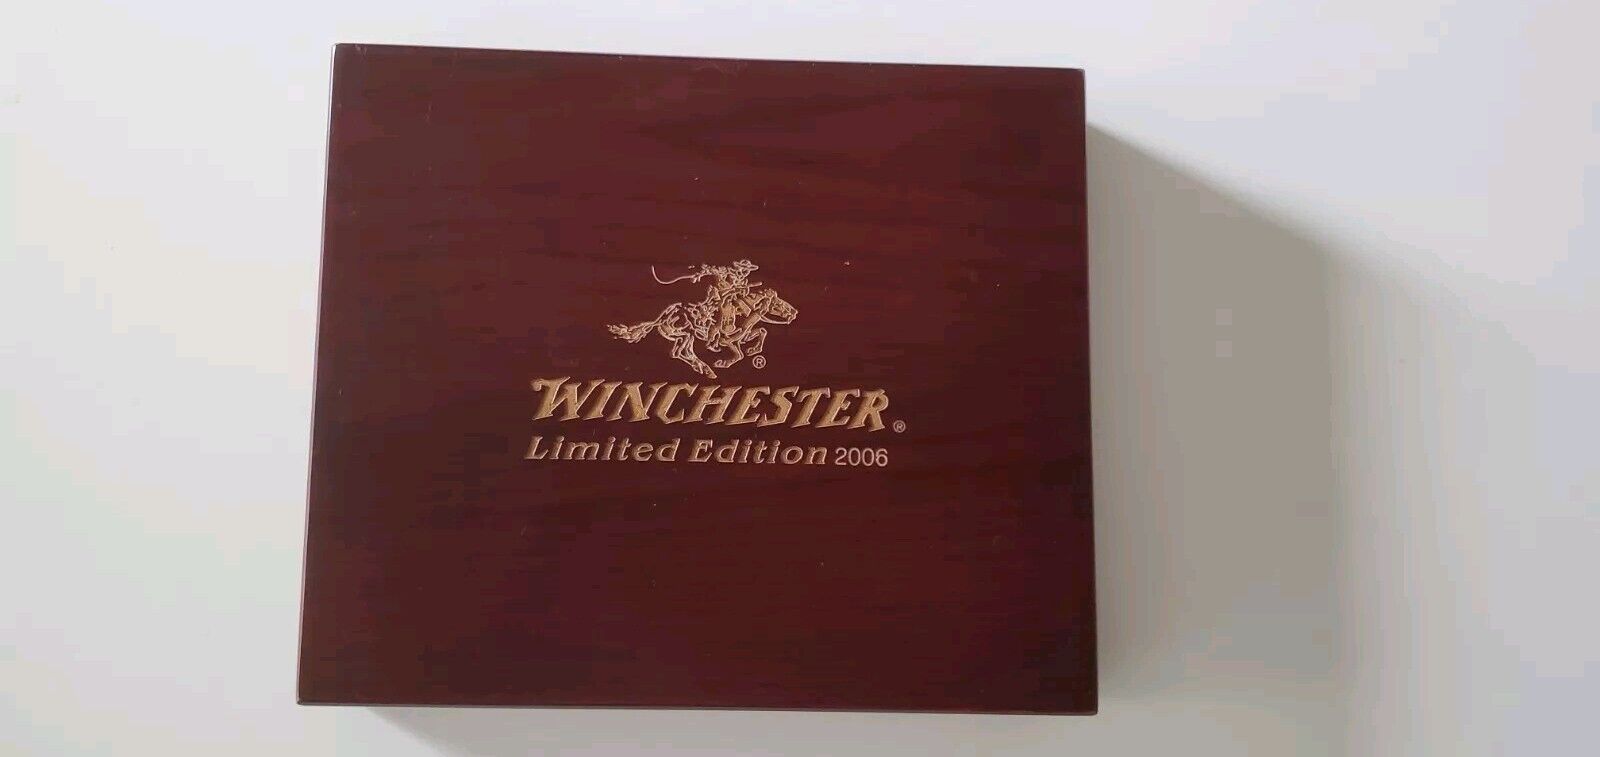 Winchester Limited Edition 2006 Wildlife, Bass 3-Piece Pocket knife Gift Set